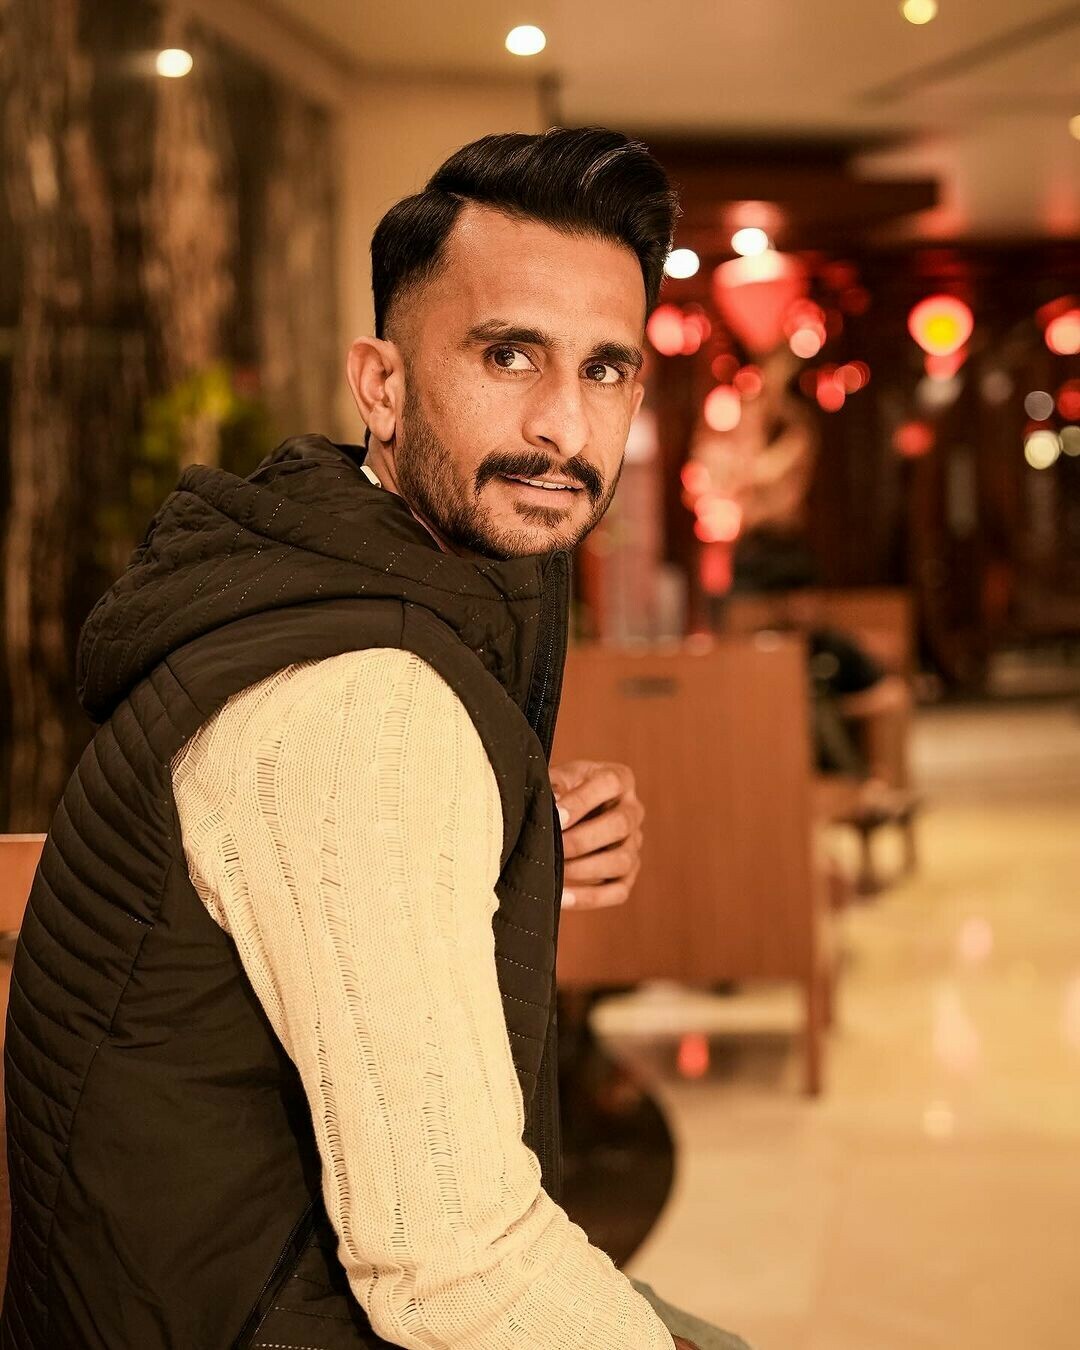 ‘Every human life matters’: Hassan Ali speaks out after criticism over condemnation of Reasi attack